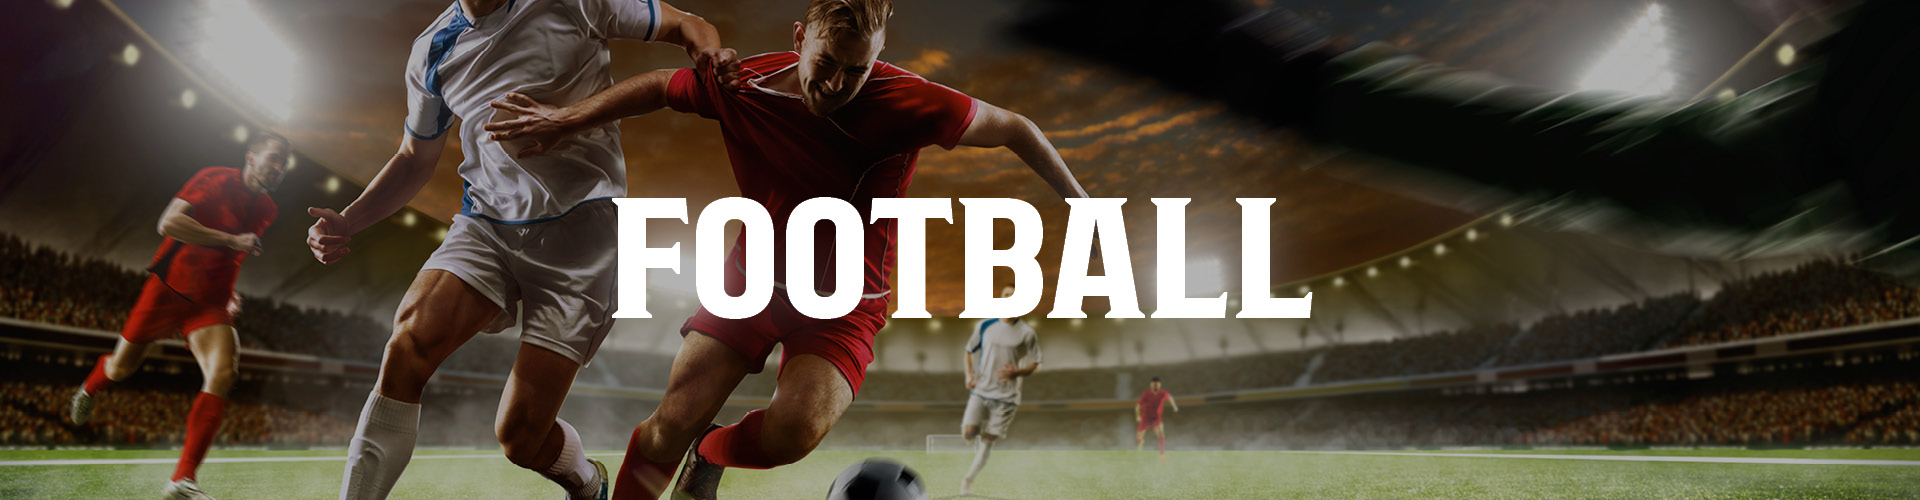 Watch Live Football in Swindon at The Wyvern Tavern Pub